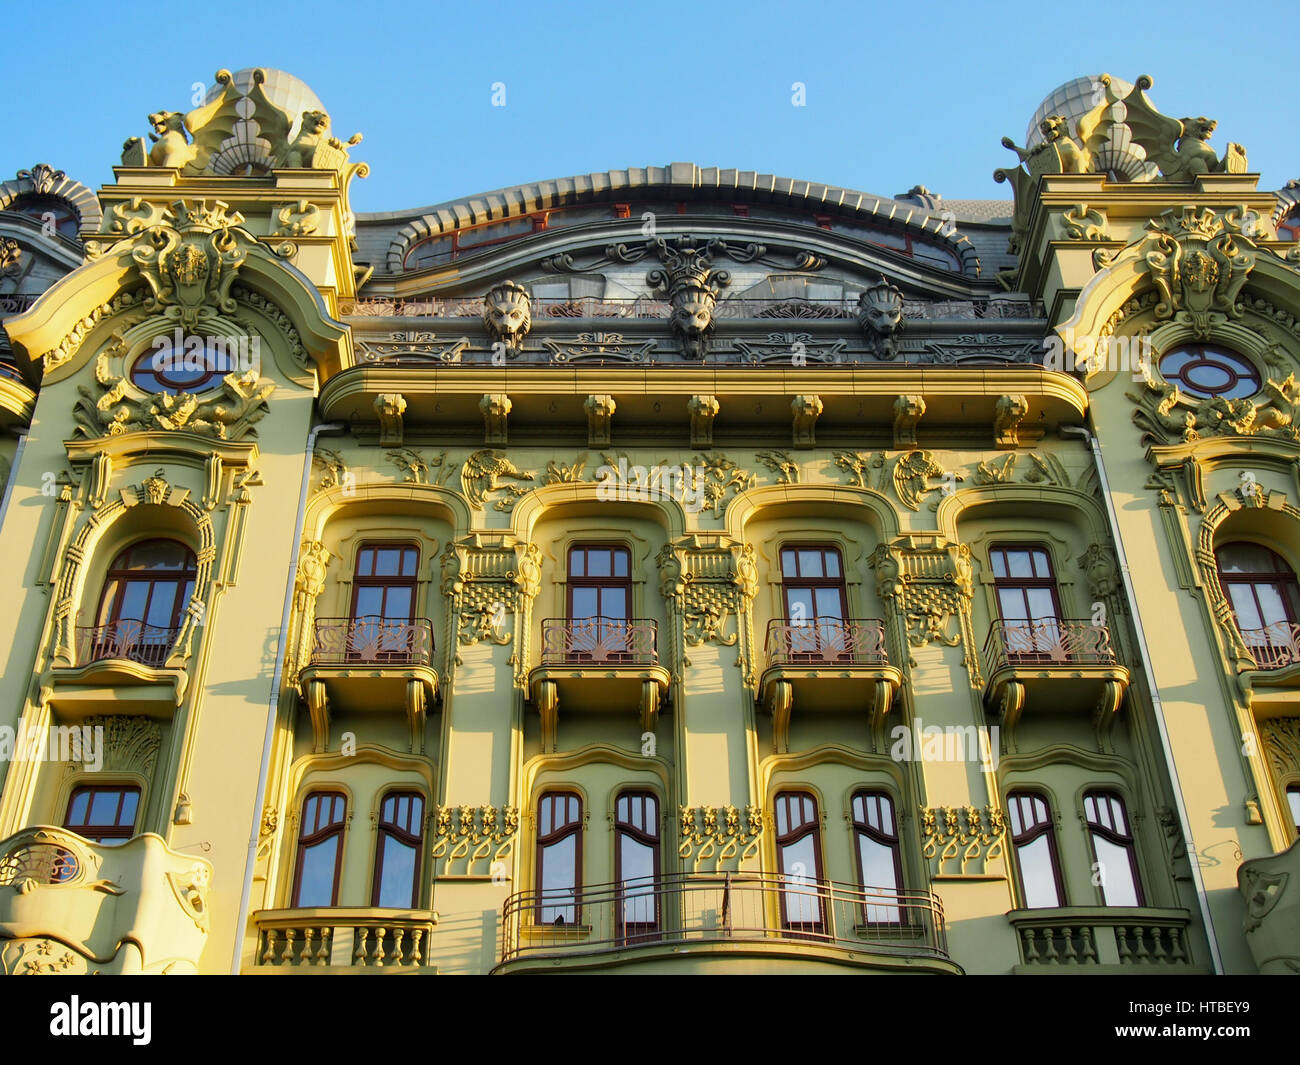 An ornate facade on a building in downtown Odessa, Ukraine. Stock Photo